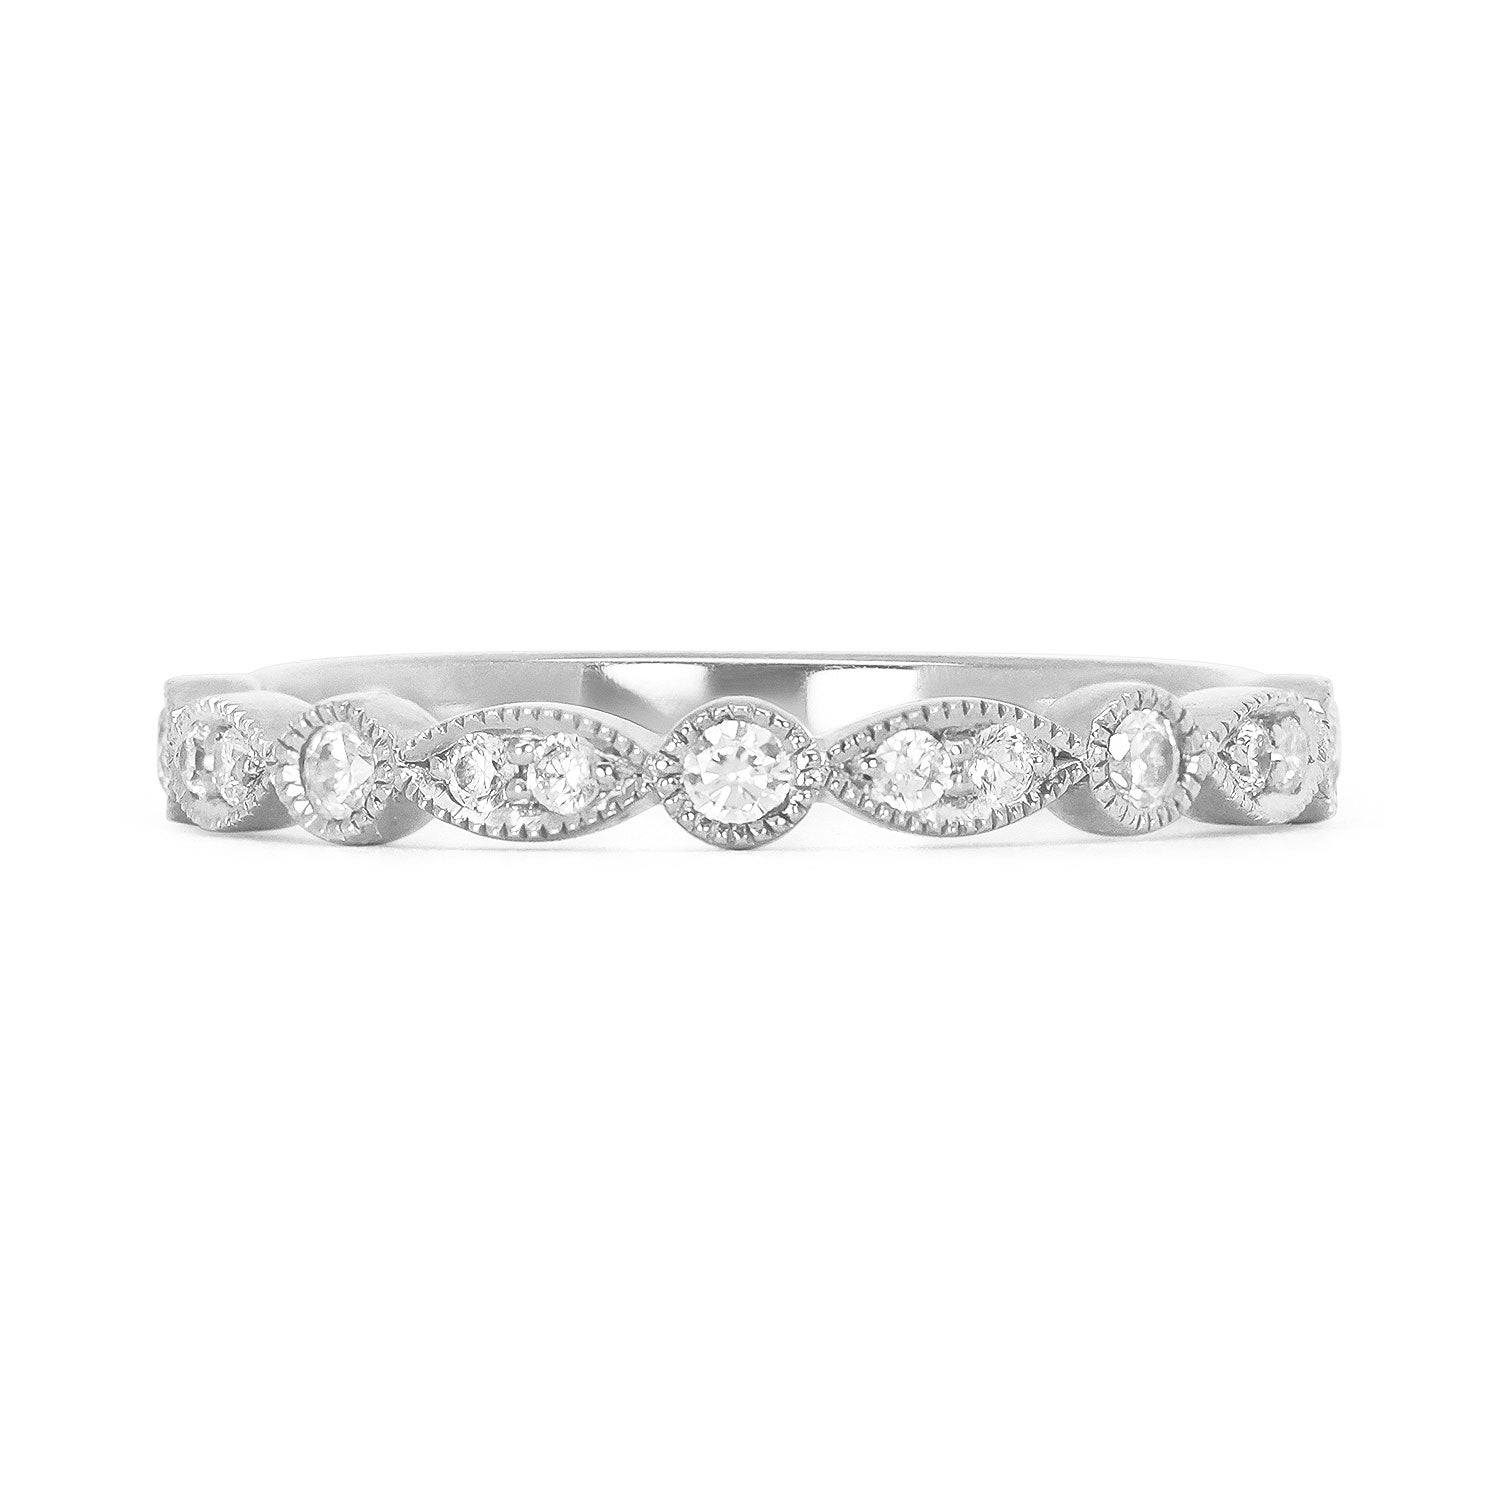 Lebrusan Studio's Amare Marquise wedding band in recycled platinum. Conflict-free Canadian diamonds are set into round and marquise-shaped settings with hand-engraved milgrain beading around the edges